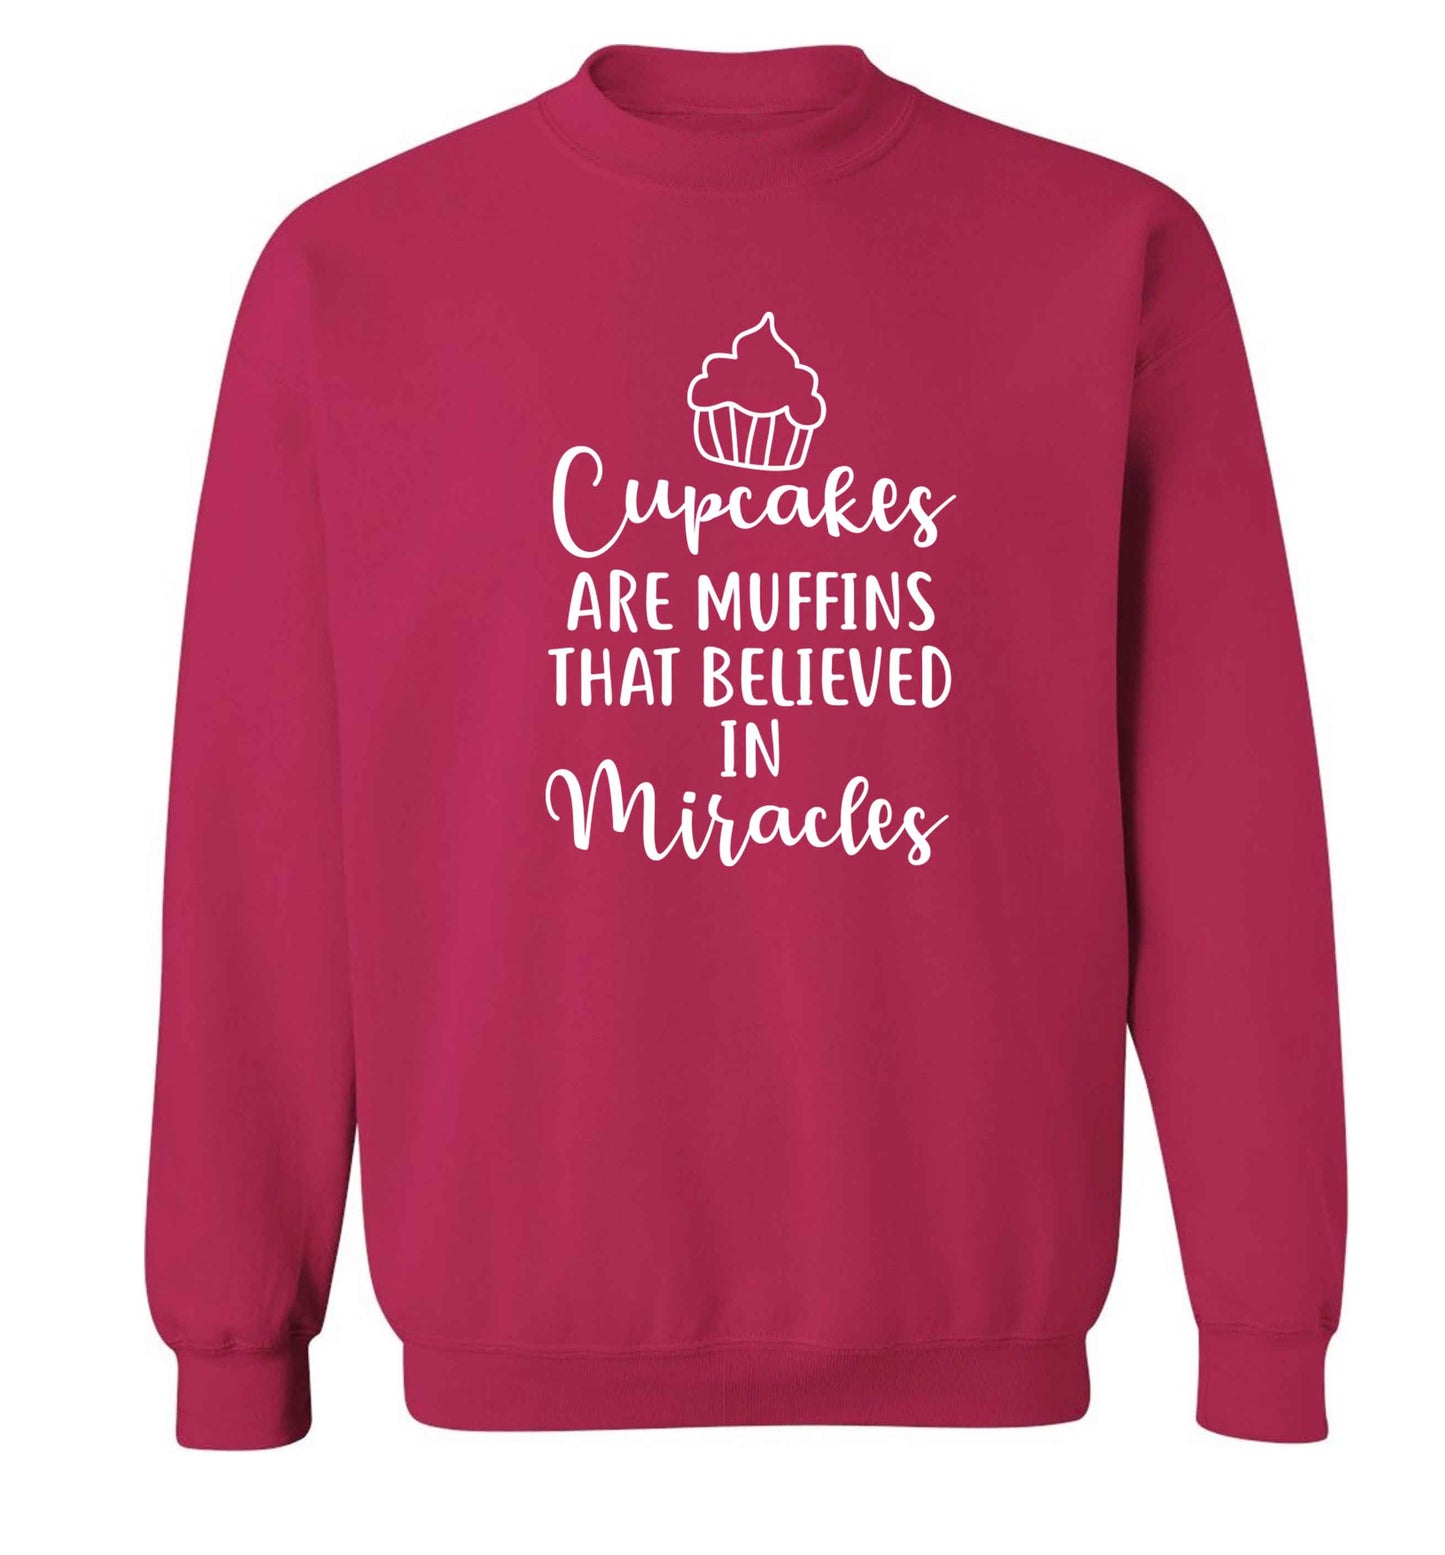 Cupcakes muffins that believed in miracles Adult's unisex pink Sweater 2XL